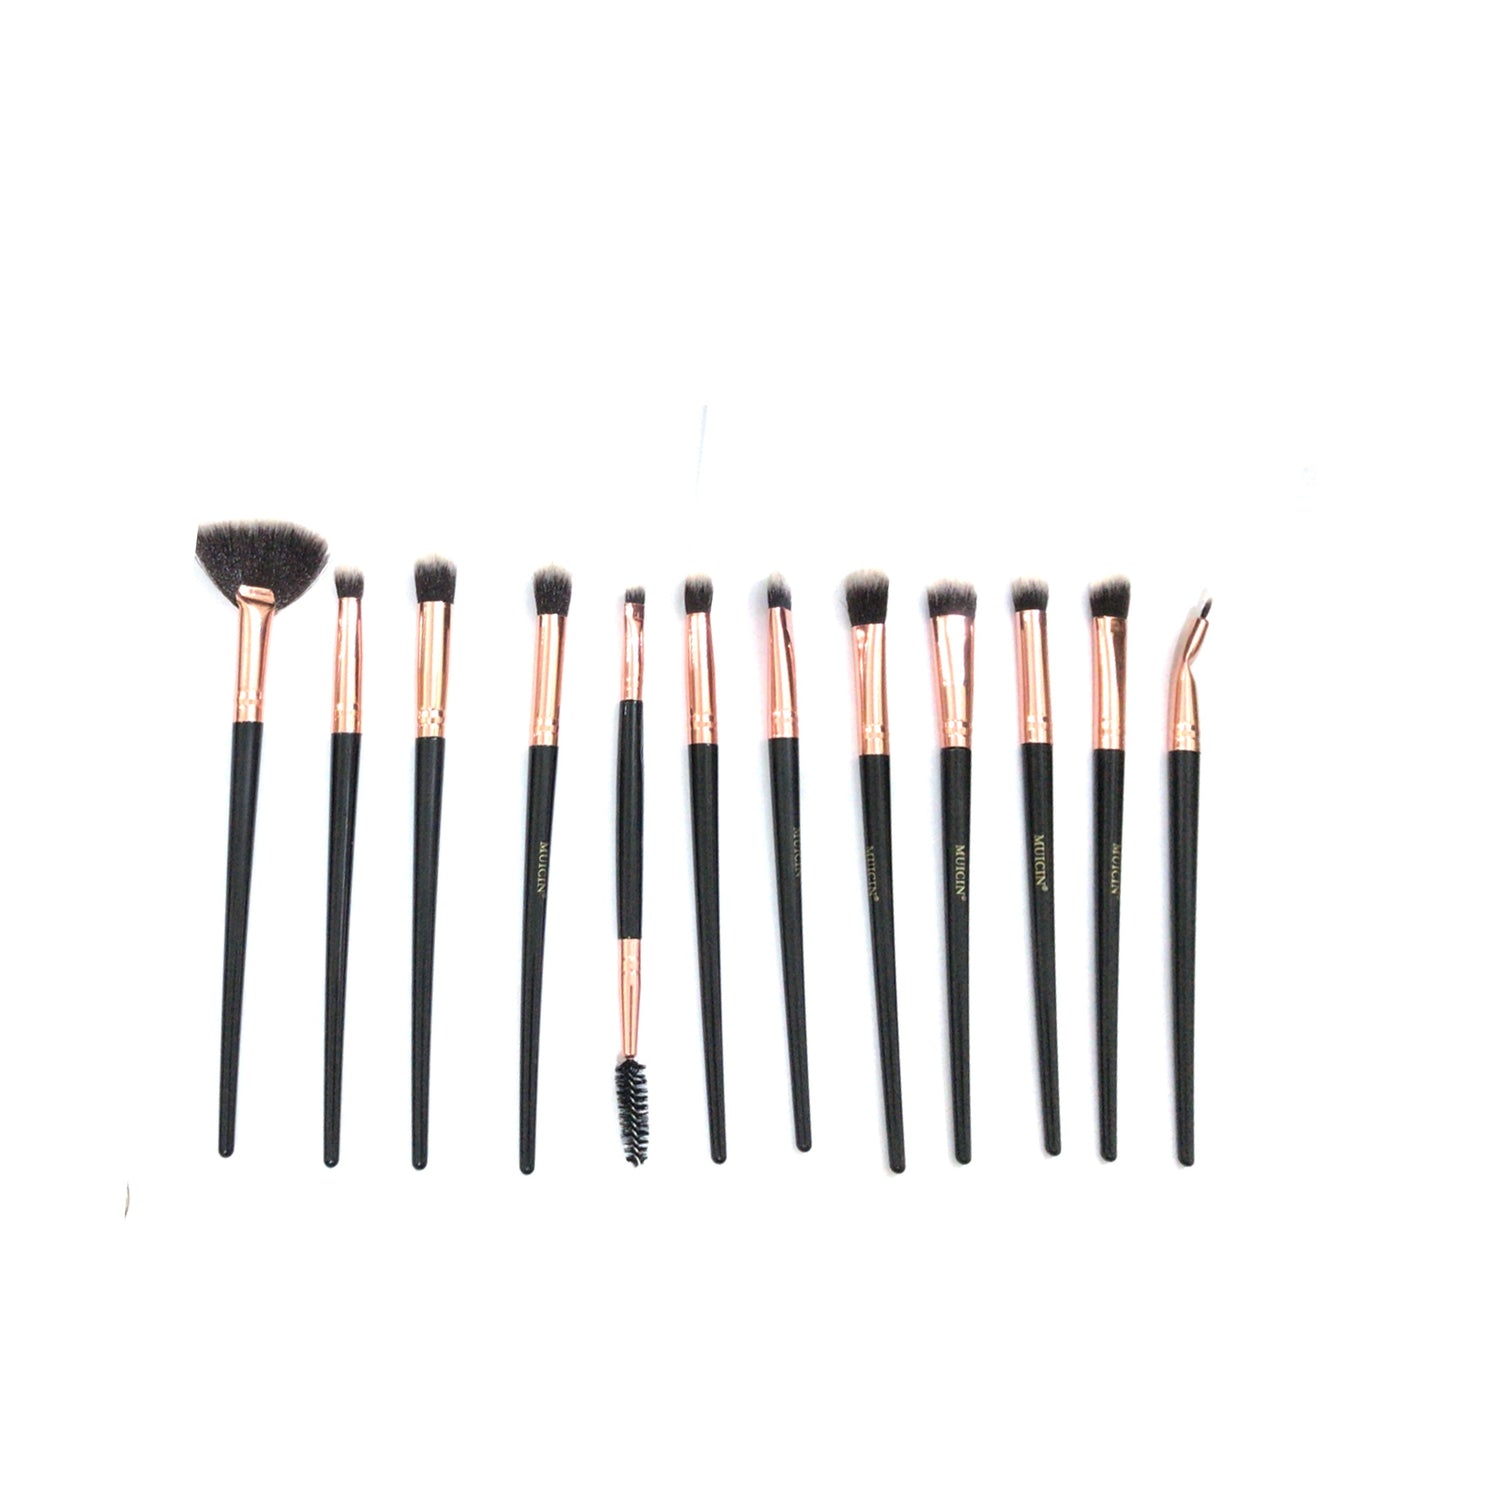 BLACK POUCH ROSE GOLD EYE BRUSH SET - 12 PIECES FOR SOPHISTICATED EYE MAKEUP